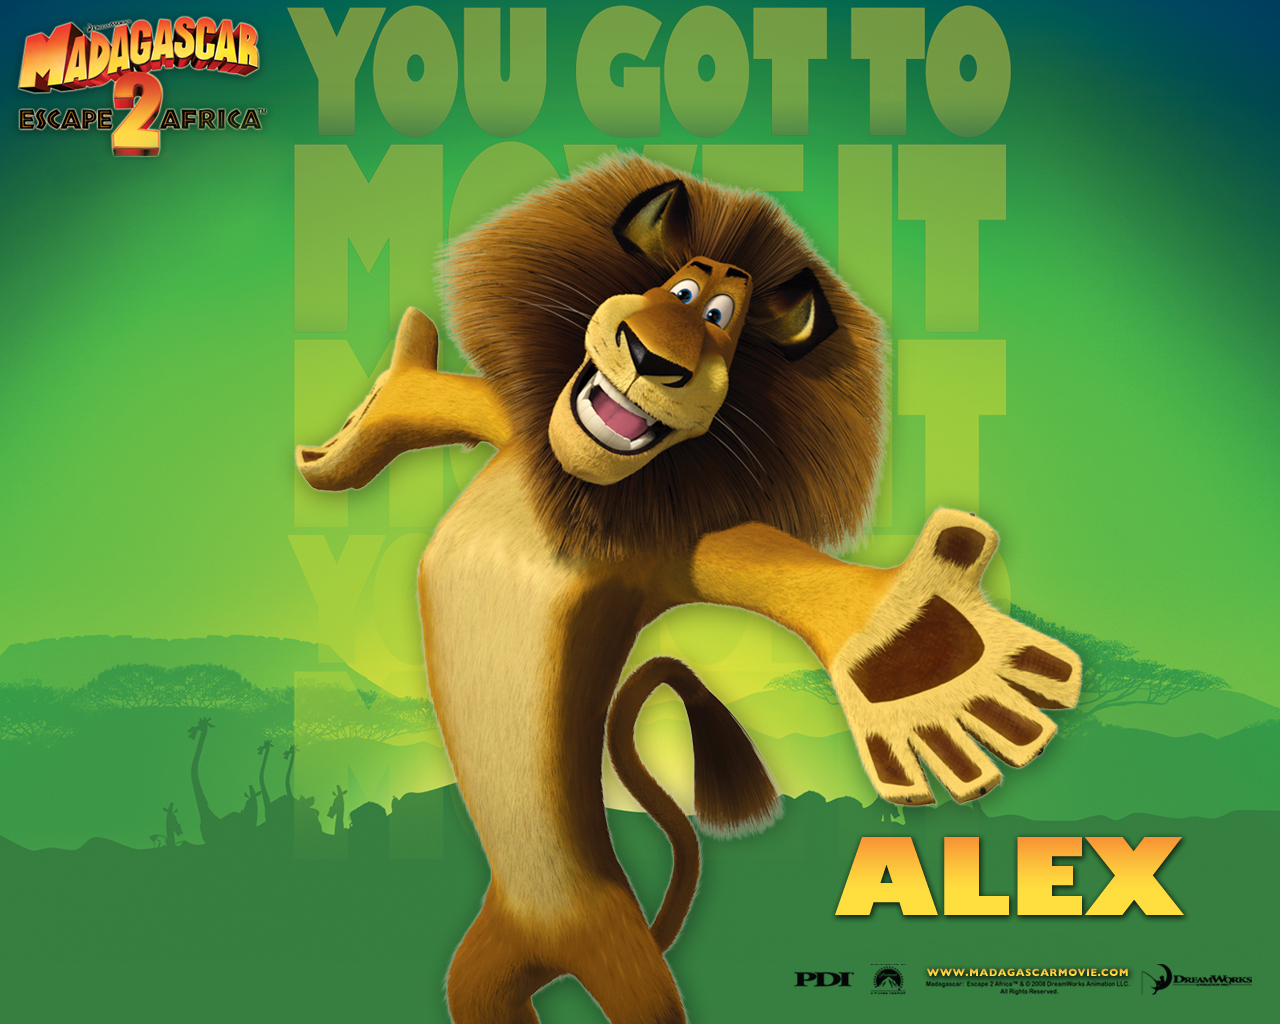 Alex The Lion From The Madagascar Cg Animated Movies - Madagascar 2 Alex  Poster - 1280x1024 Wallpaper 